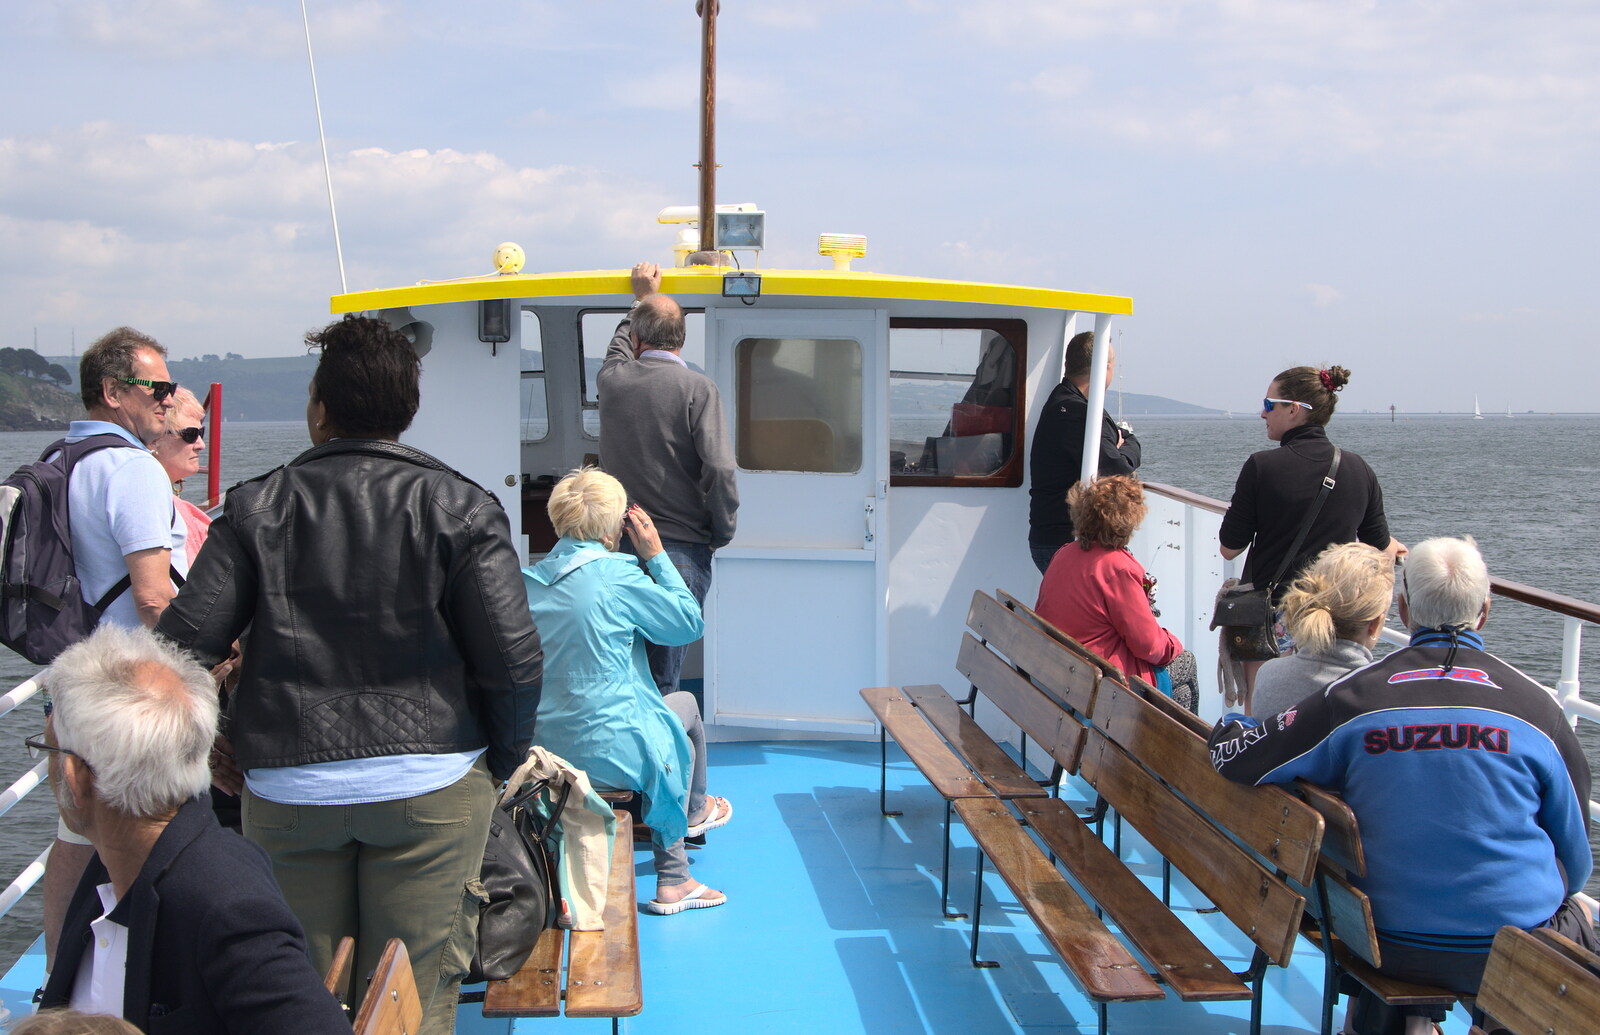 On the tour boat on the Sound from A Tamar River Trip, Plymouth, Devon - 30th May 2016